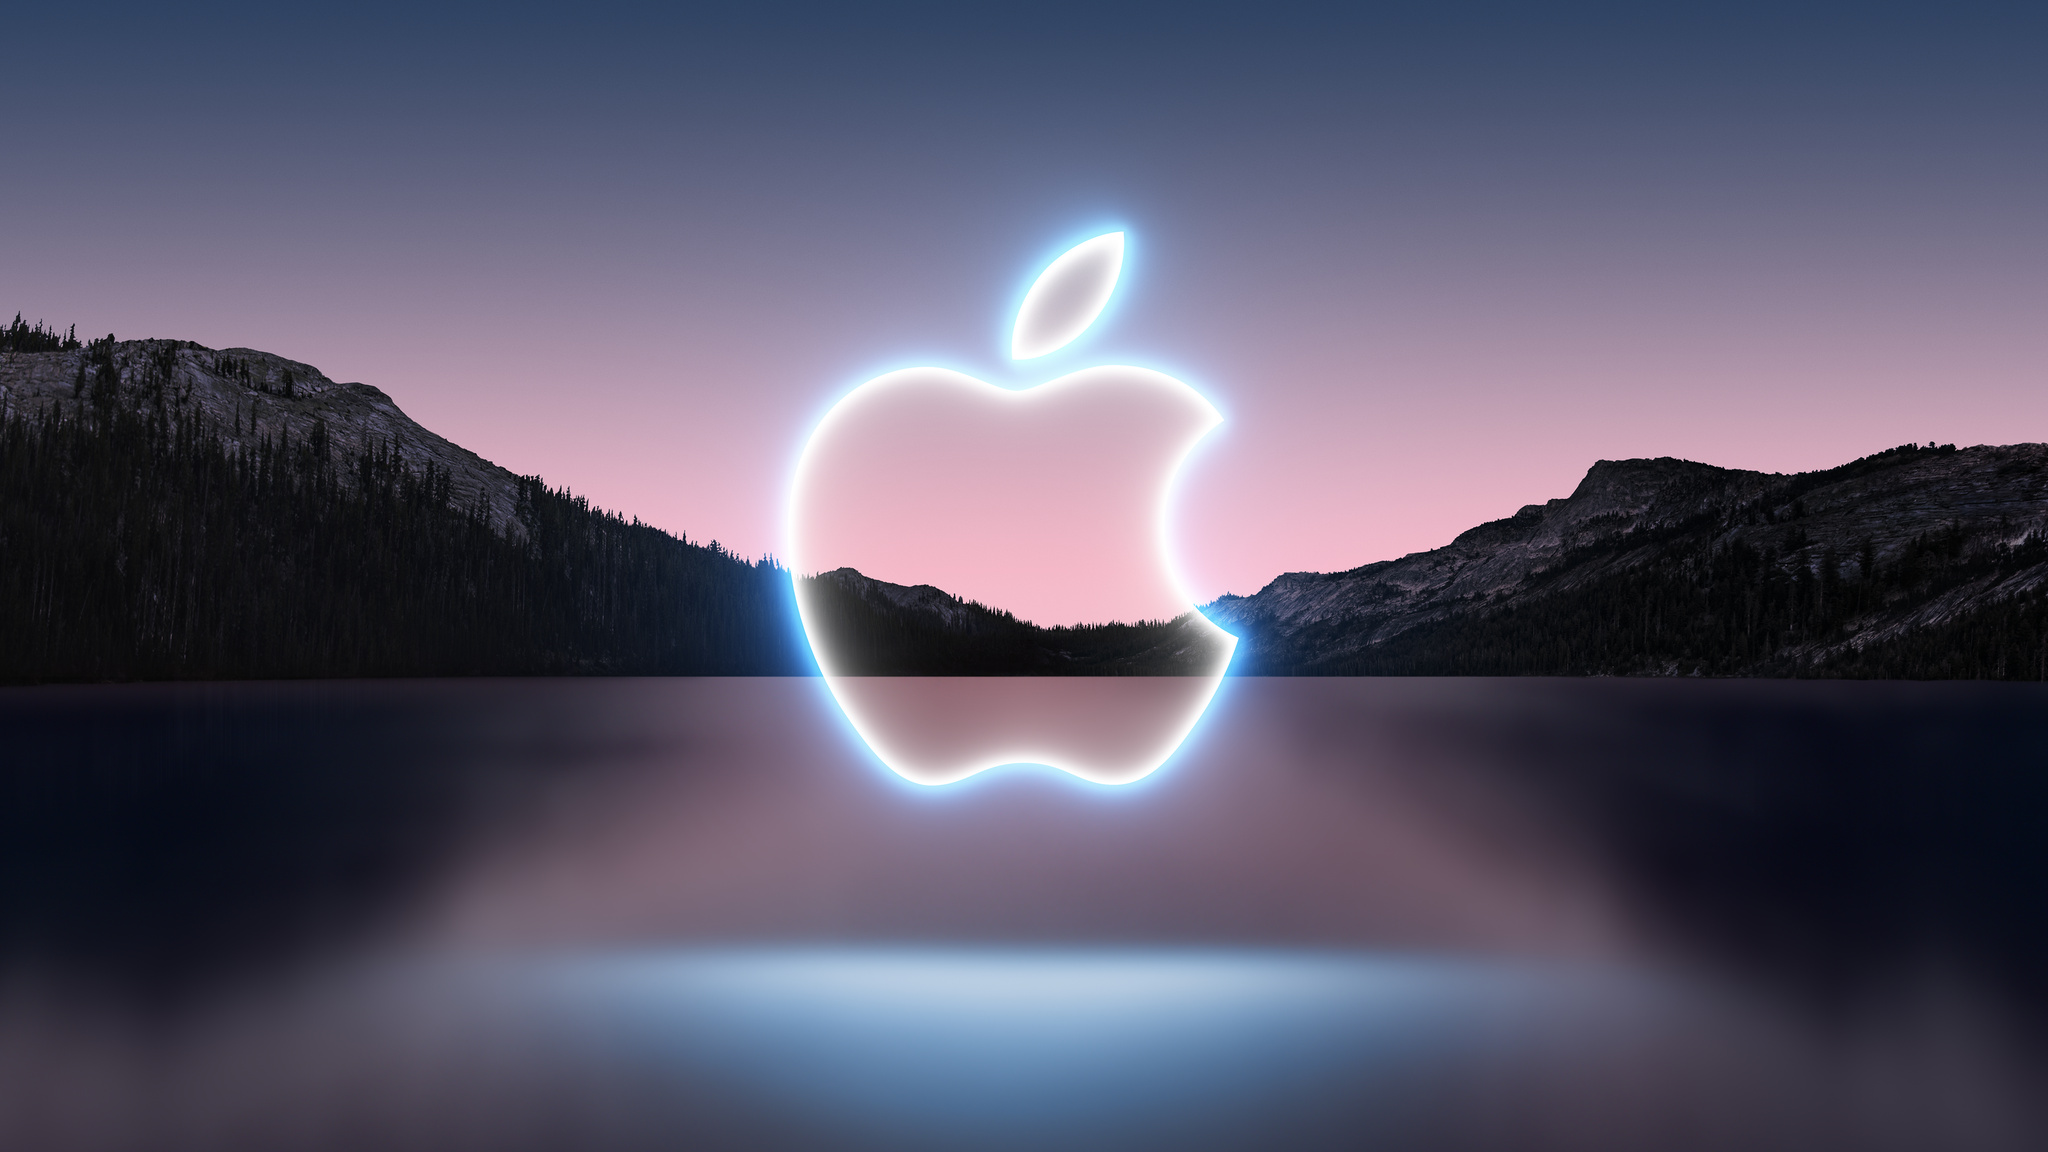 Where to watch Apple's presentation